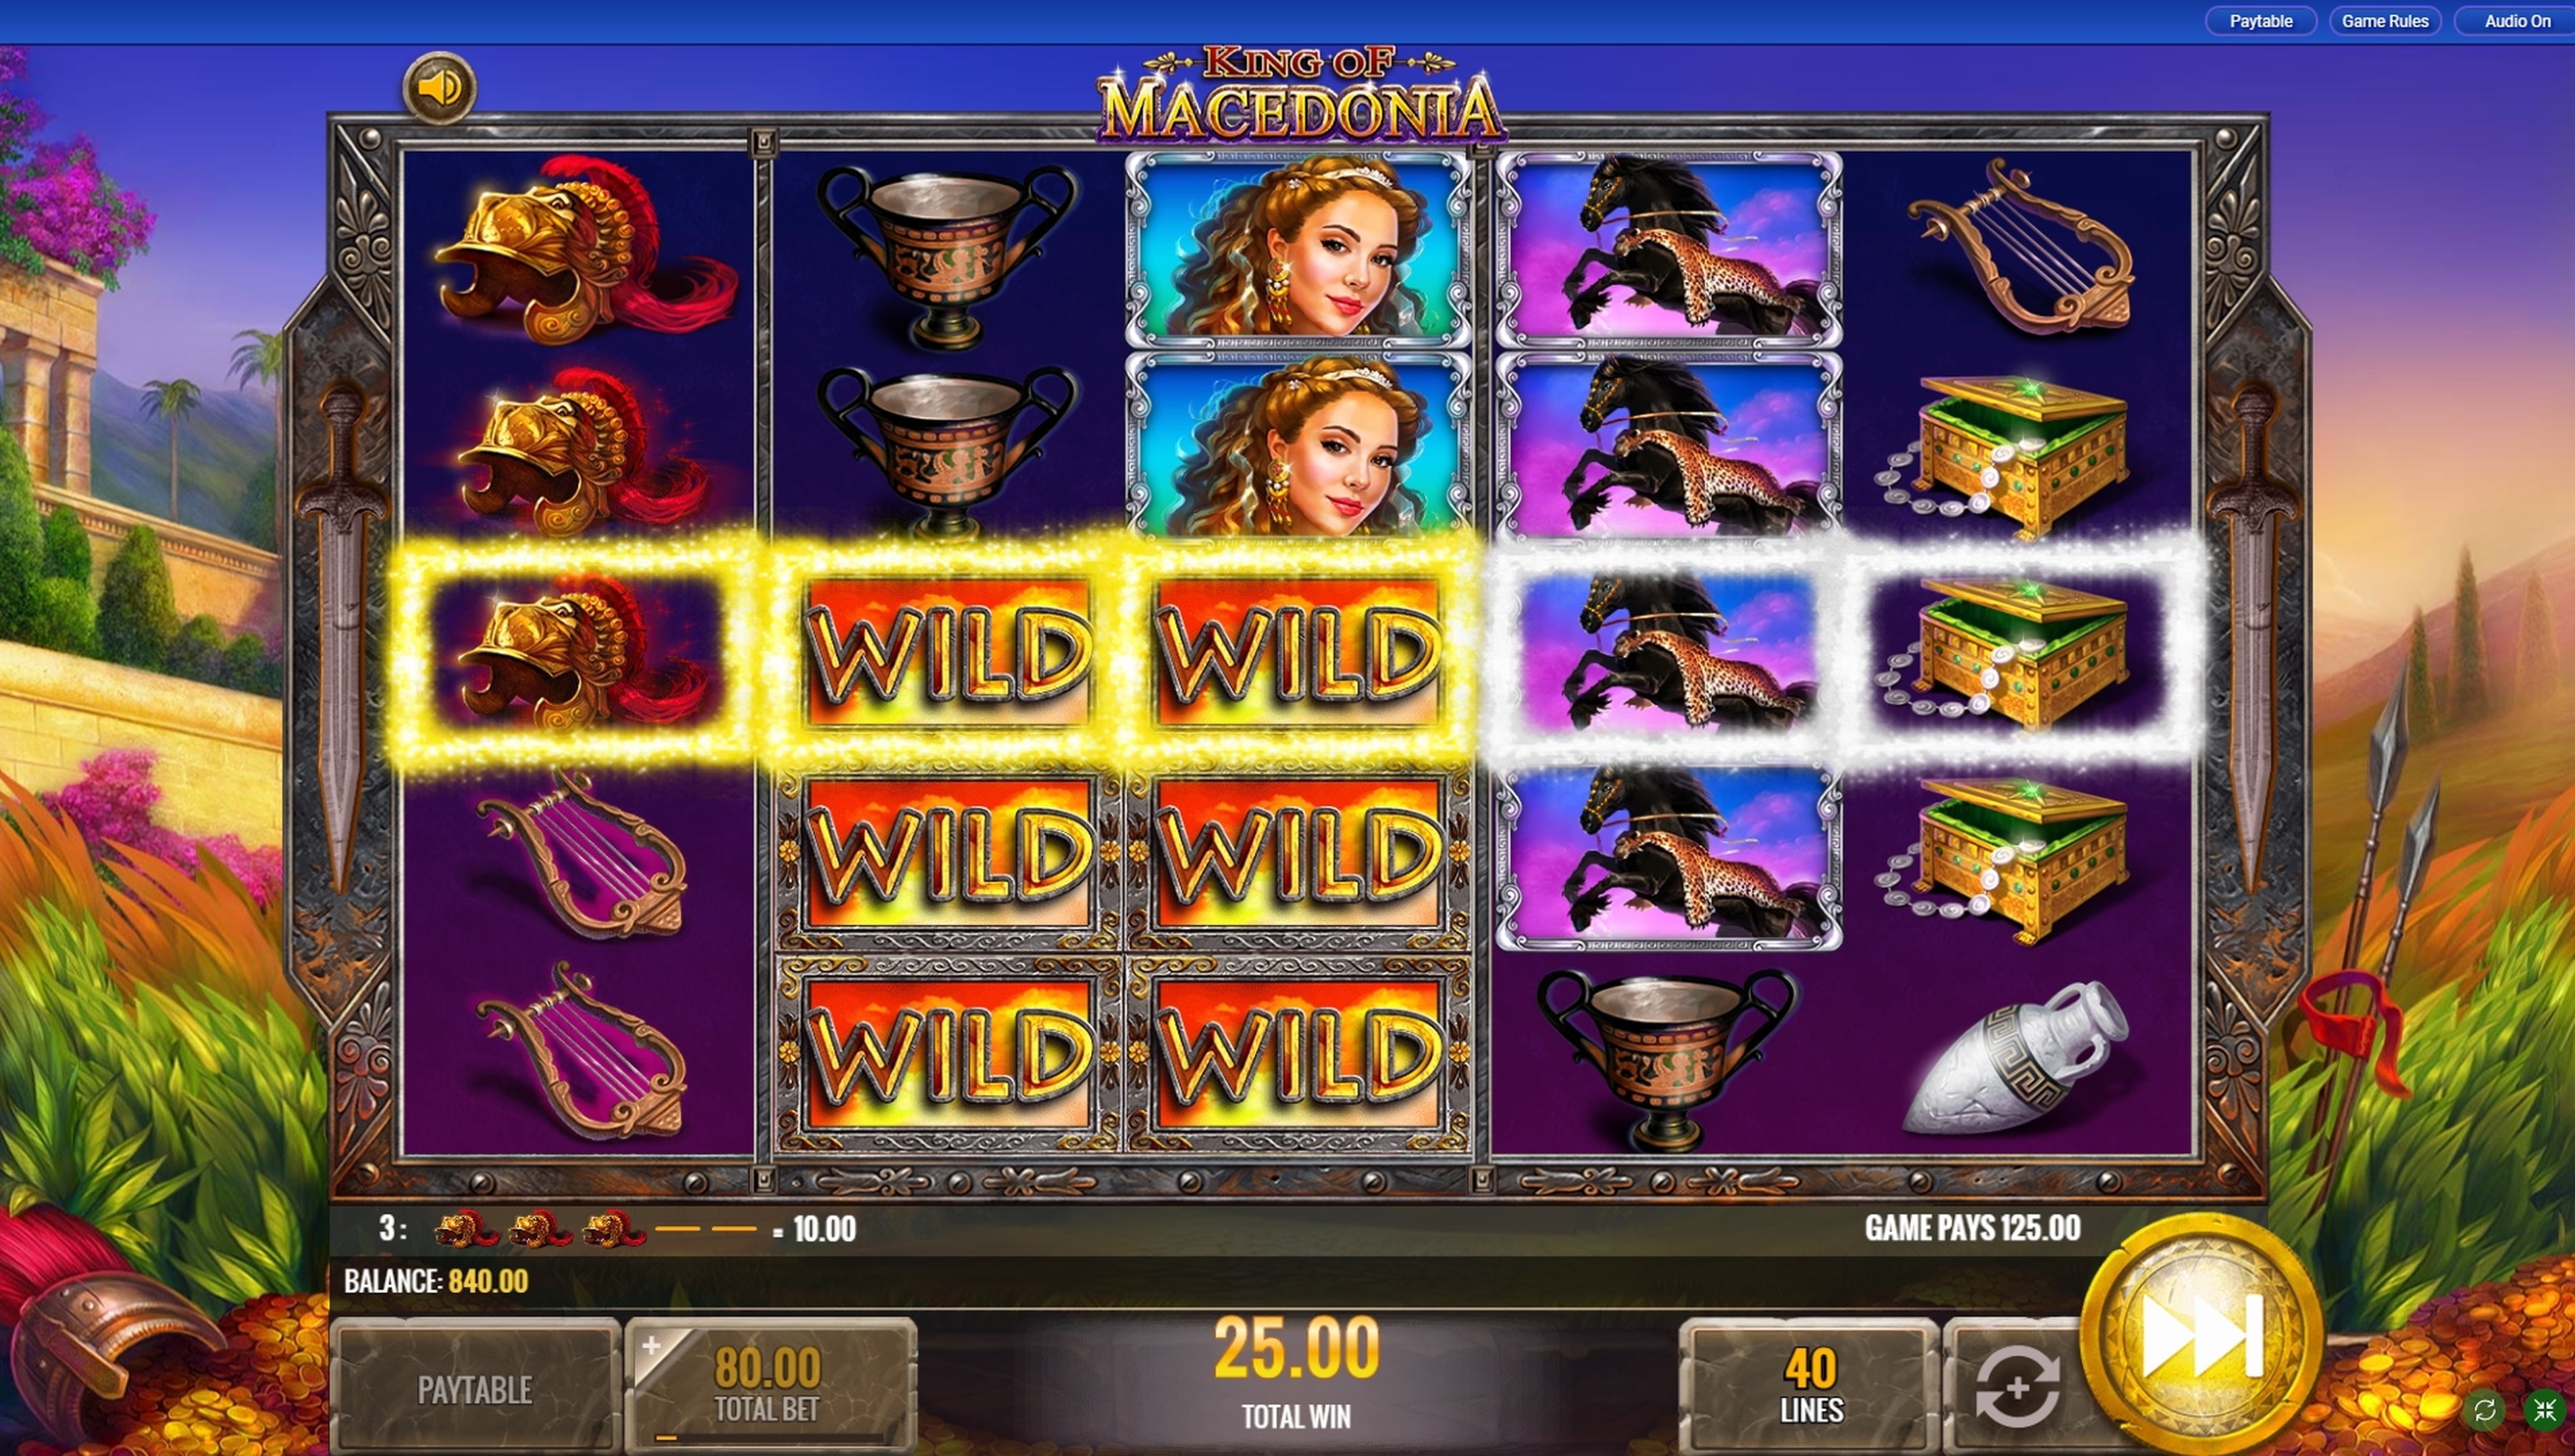 IGT Releases New King Of Macedonia Slot